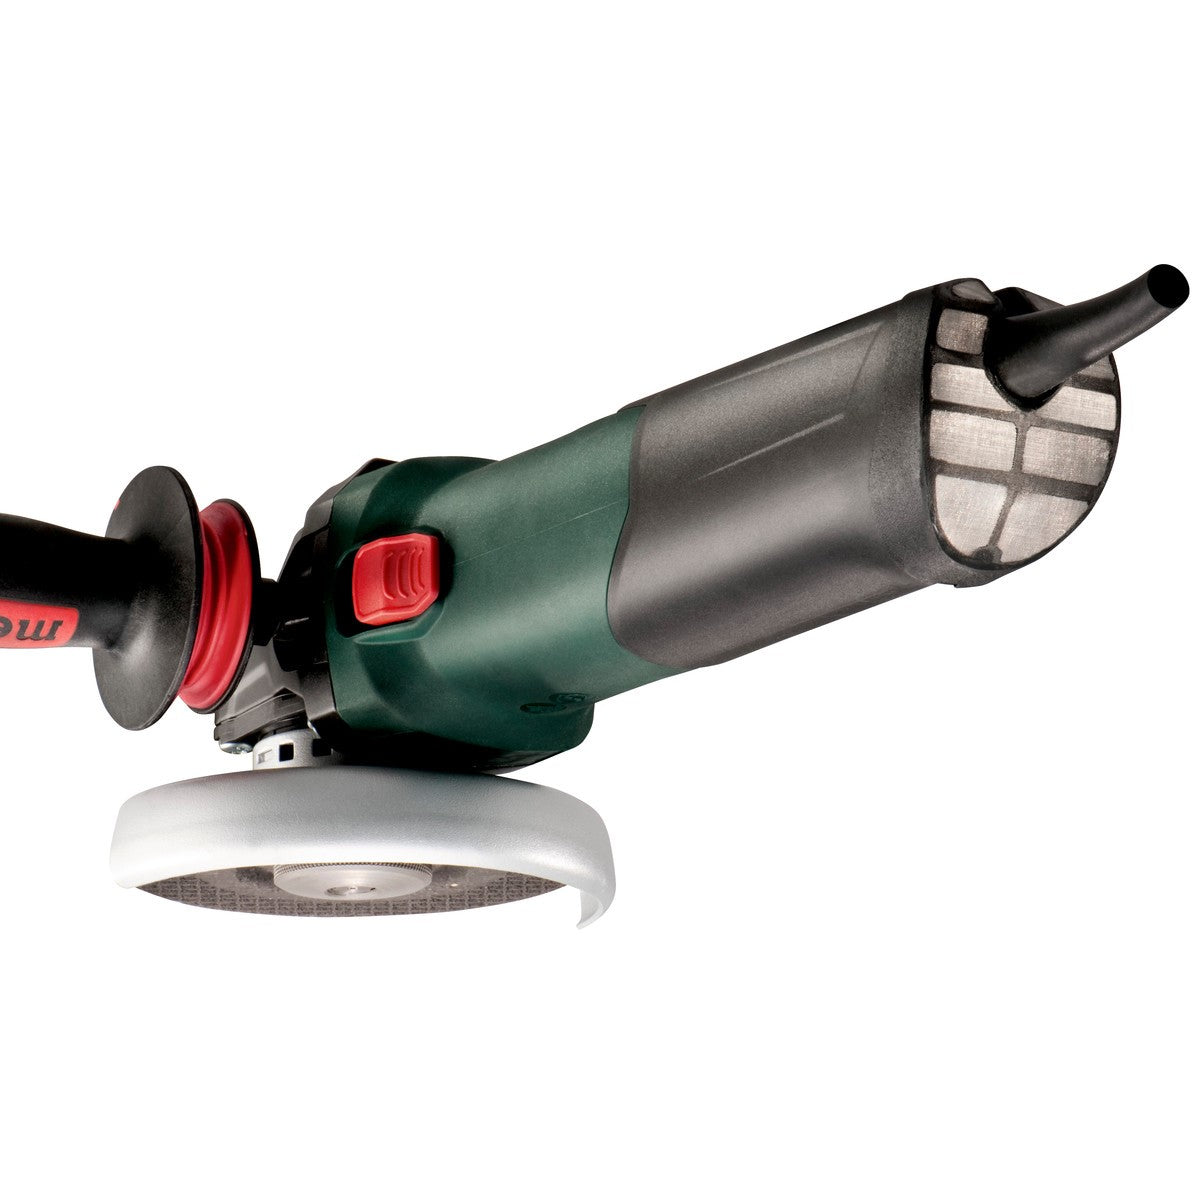 Metabo (600517420) 5 inch Angle Grinder w LockOn Switch image 1 of 3 image 2 of 3